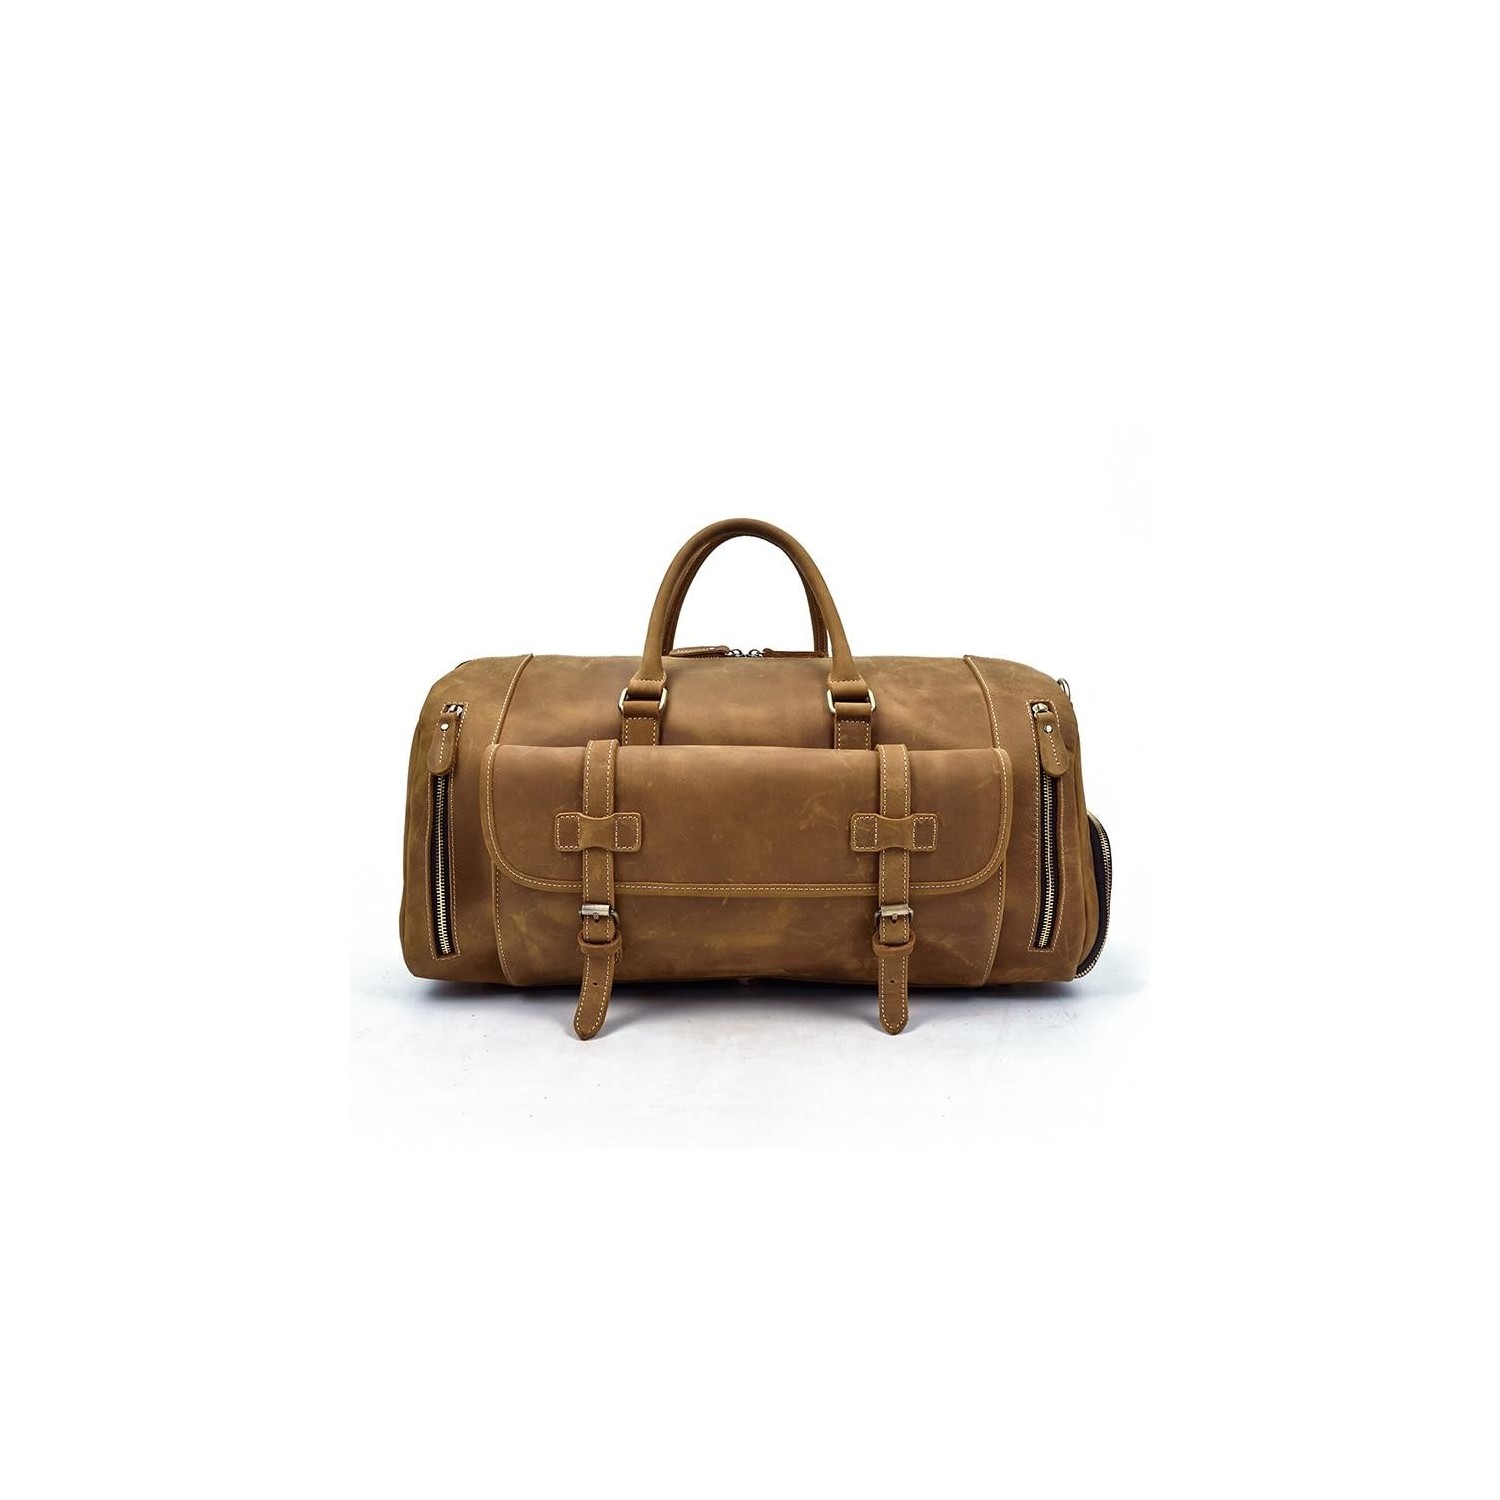 The Dagny Weekender  Large Leather Duffle Bag